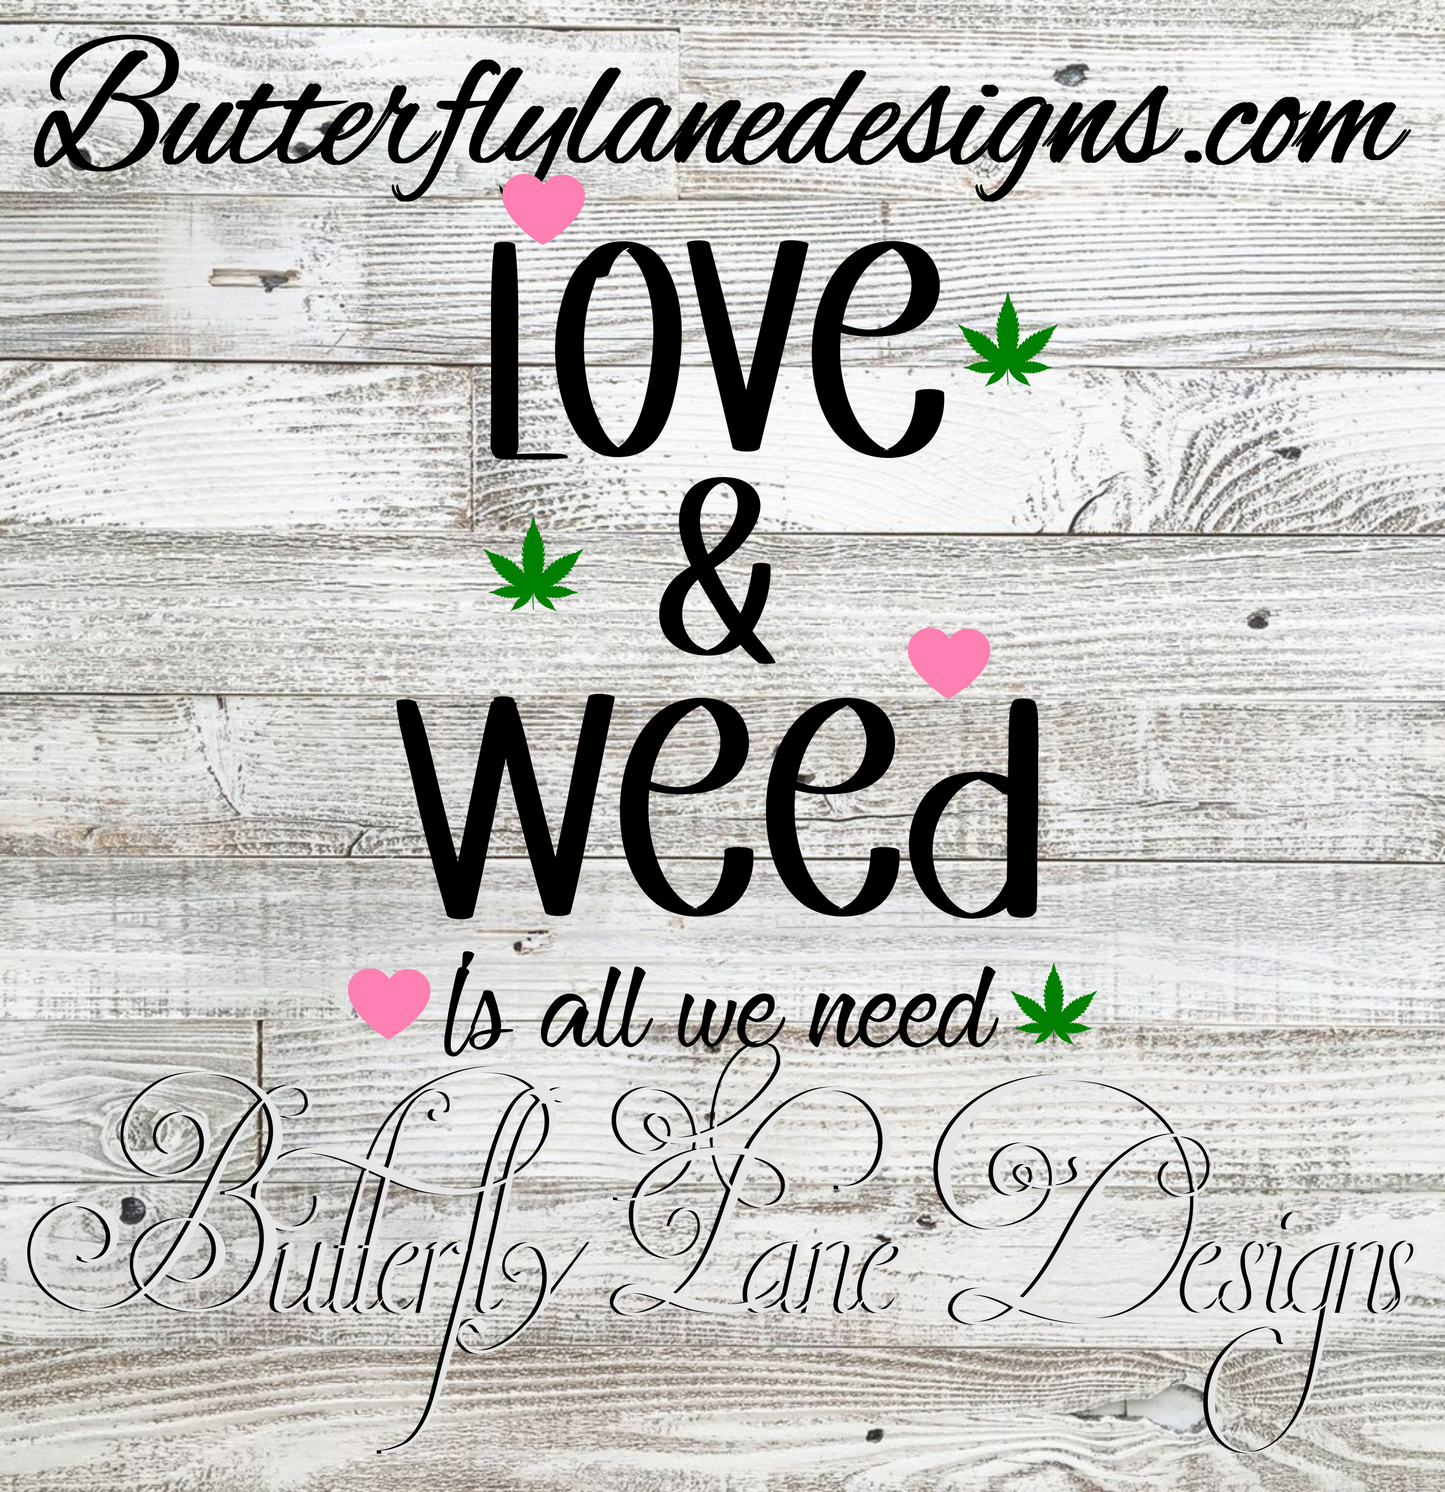 420-Love and Weed is all we need-2 :: V.C. Decal